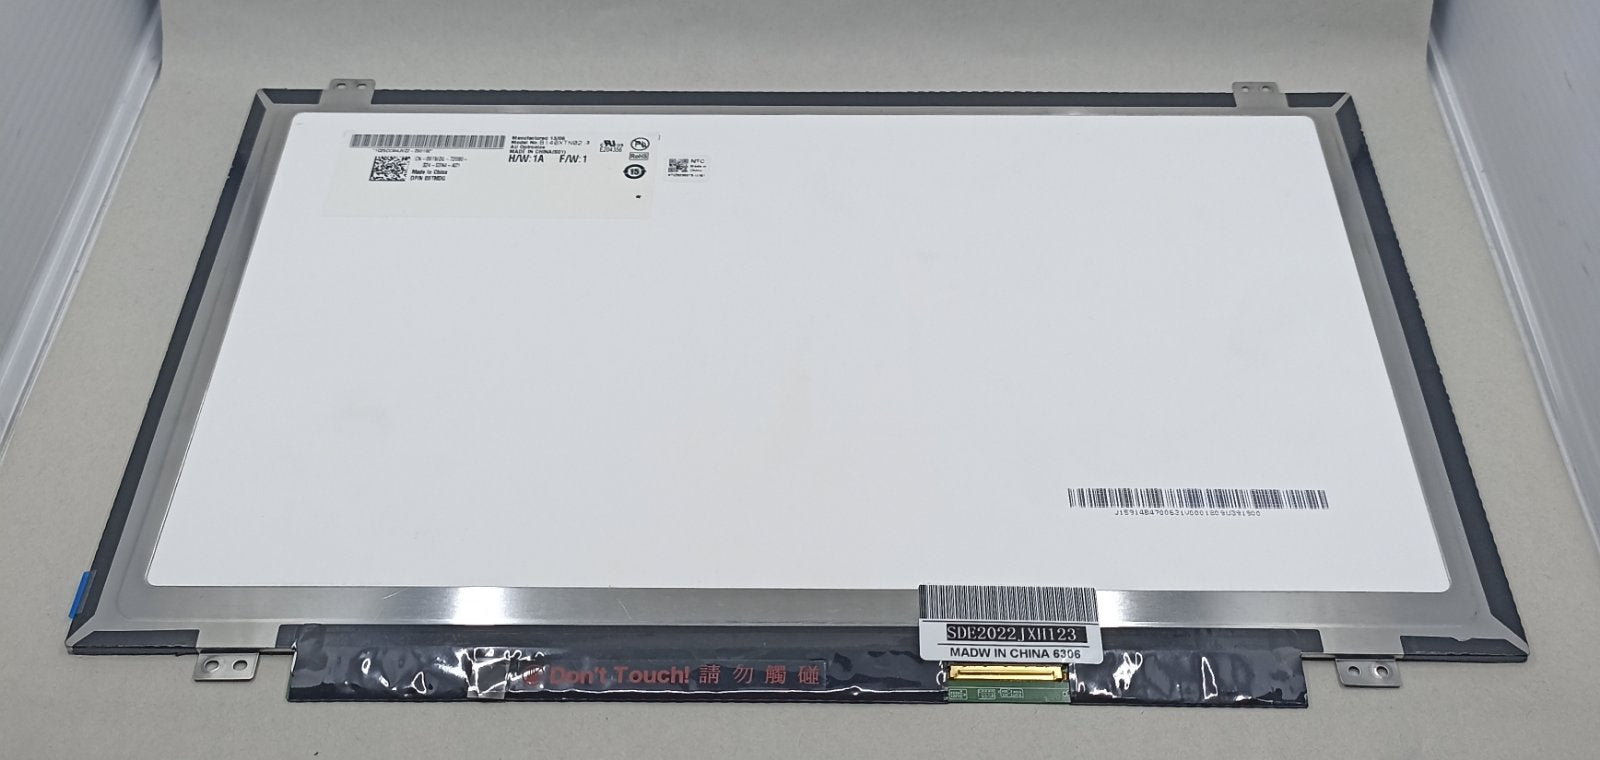 Replacement LCD For Lenovo U410 WL